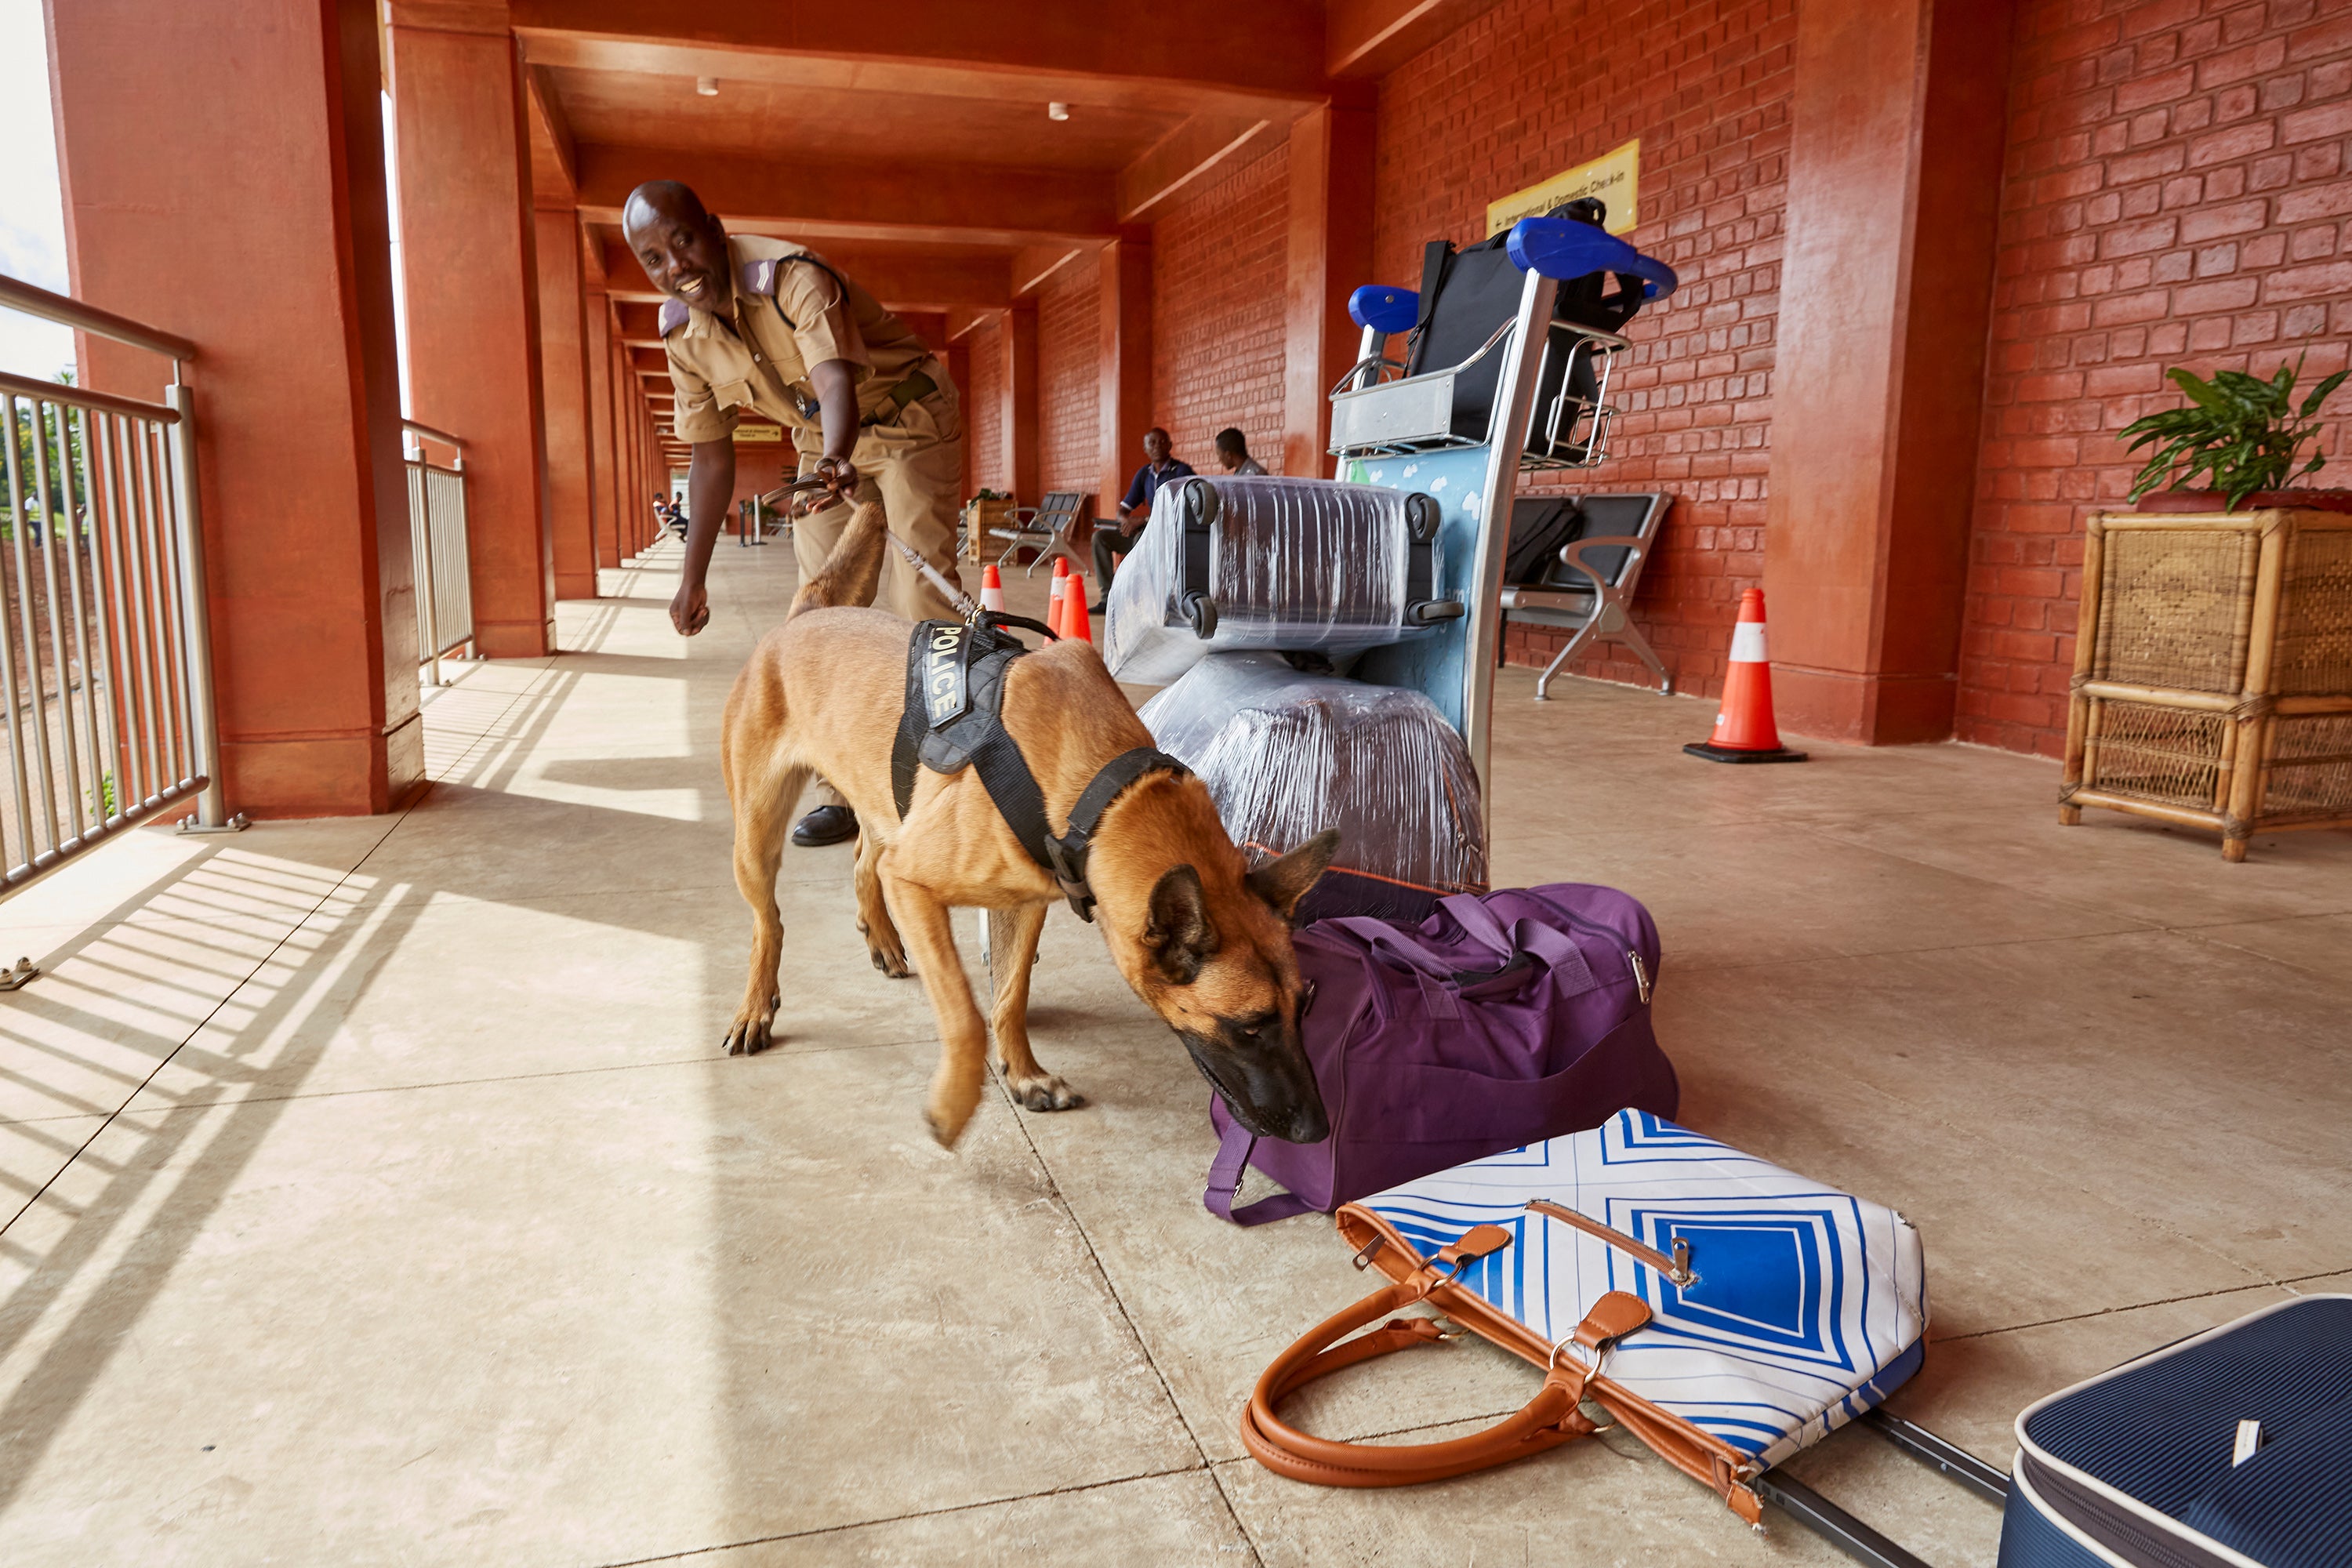 Passengers are told to put their luggage in a straight line and are then asked to step back while the dog and handler search each bag individually. Once the dog has cleared the luggage, the passengers are allowed to continue on to the check-in counter